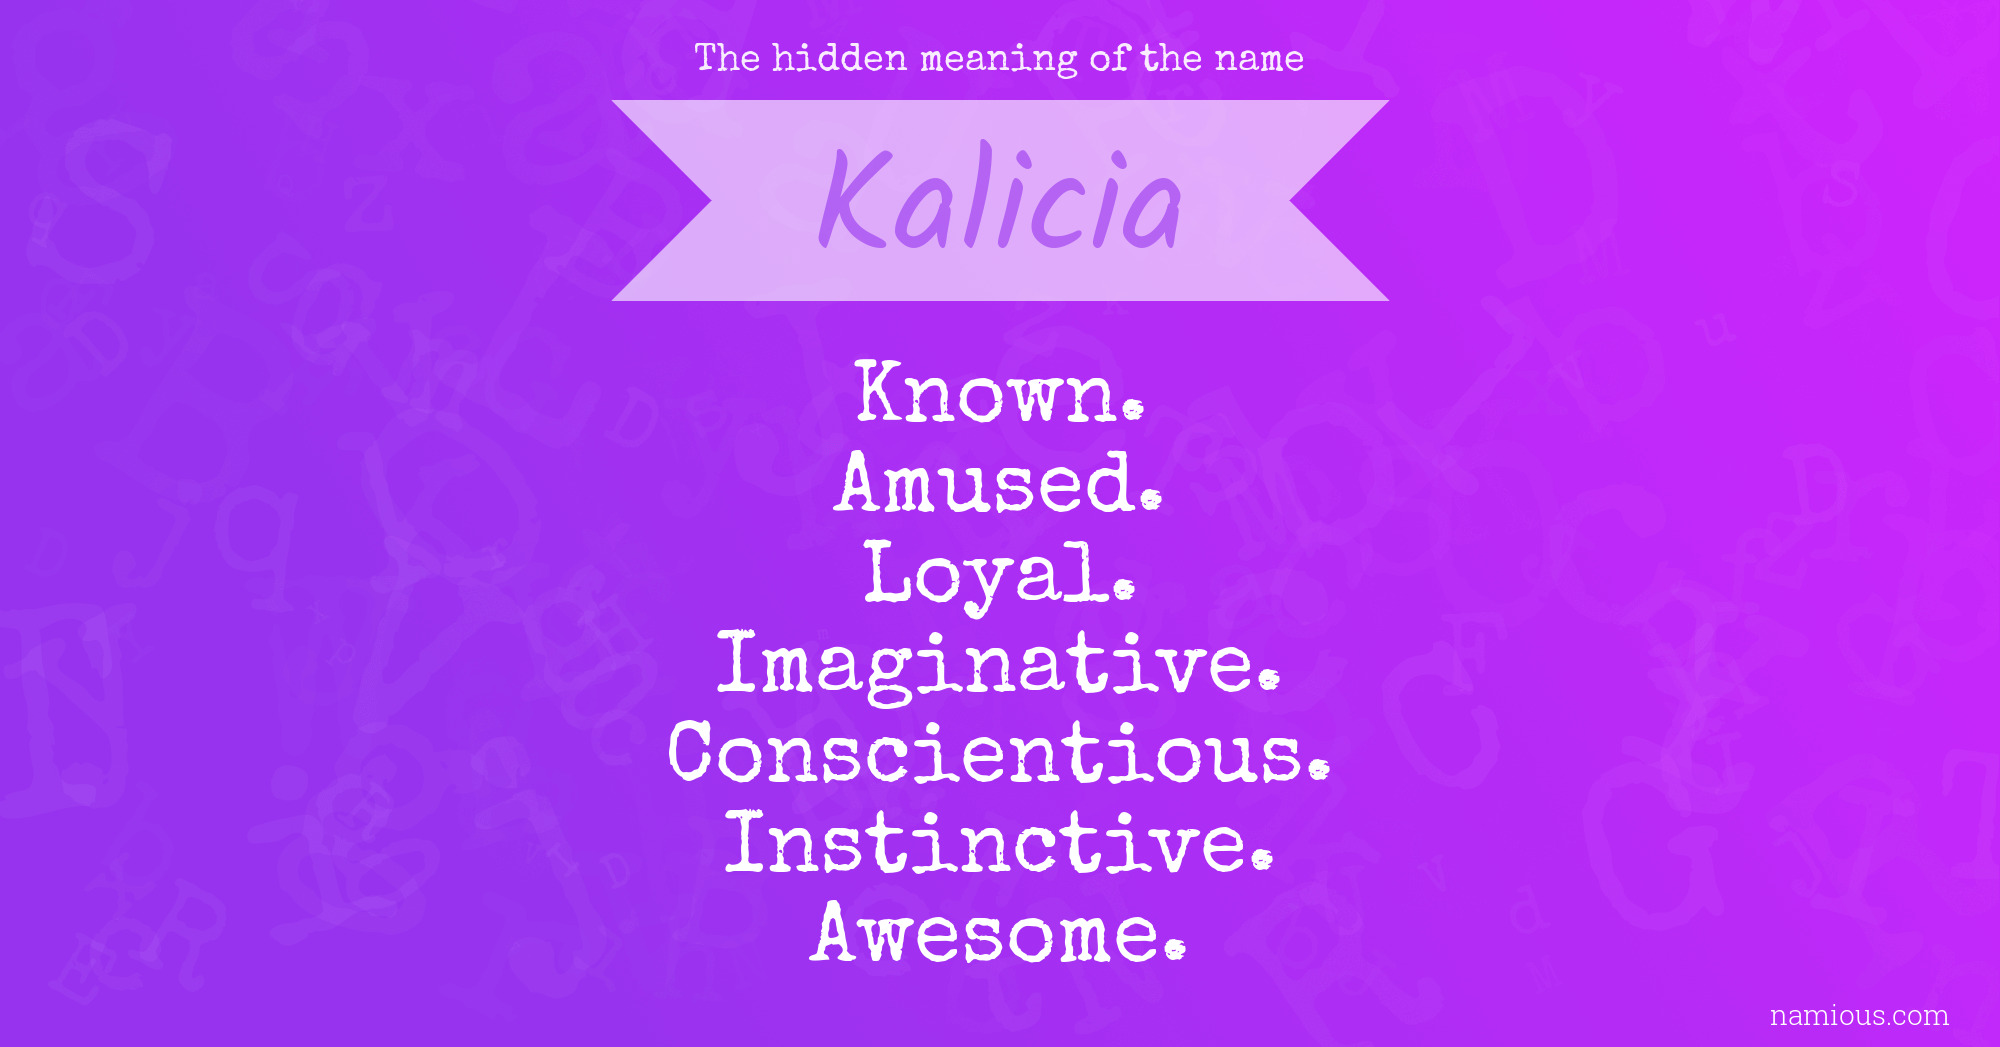 The hidden meaning of the name Kalicia